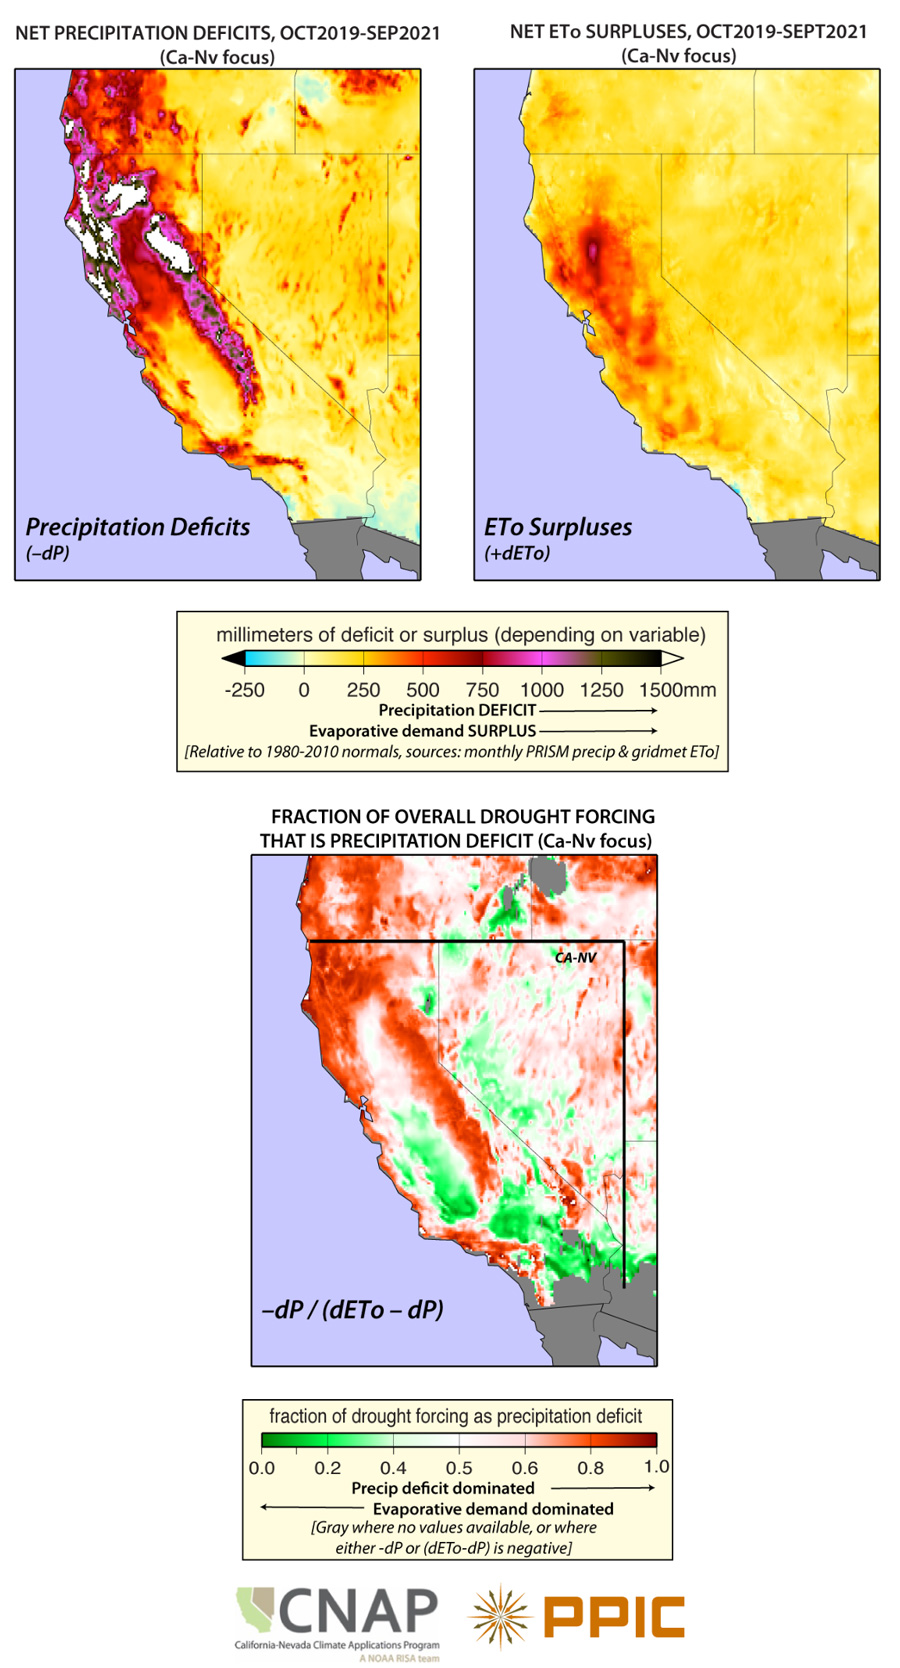 A three panel figure with all panels showing a map of California and Nevada. The top left panel is showing the precipitation deficit between October 2019 and Sept 2021. The top right panel is showing the surplus of evaporative demand between October 2019 and September 2021.  The bottom panel is showing the relative contribution of both drivers, precipitation deficit and evaporative demand surplus.